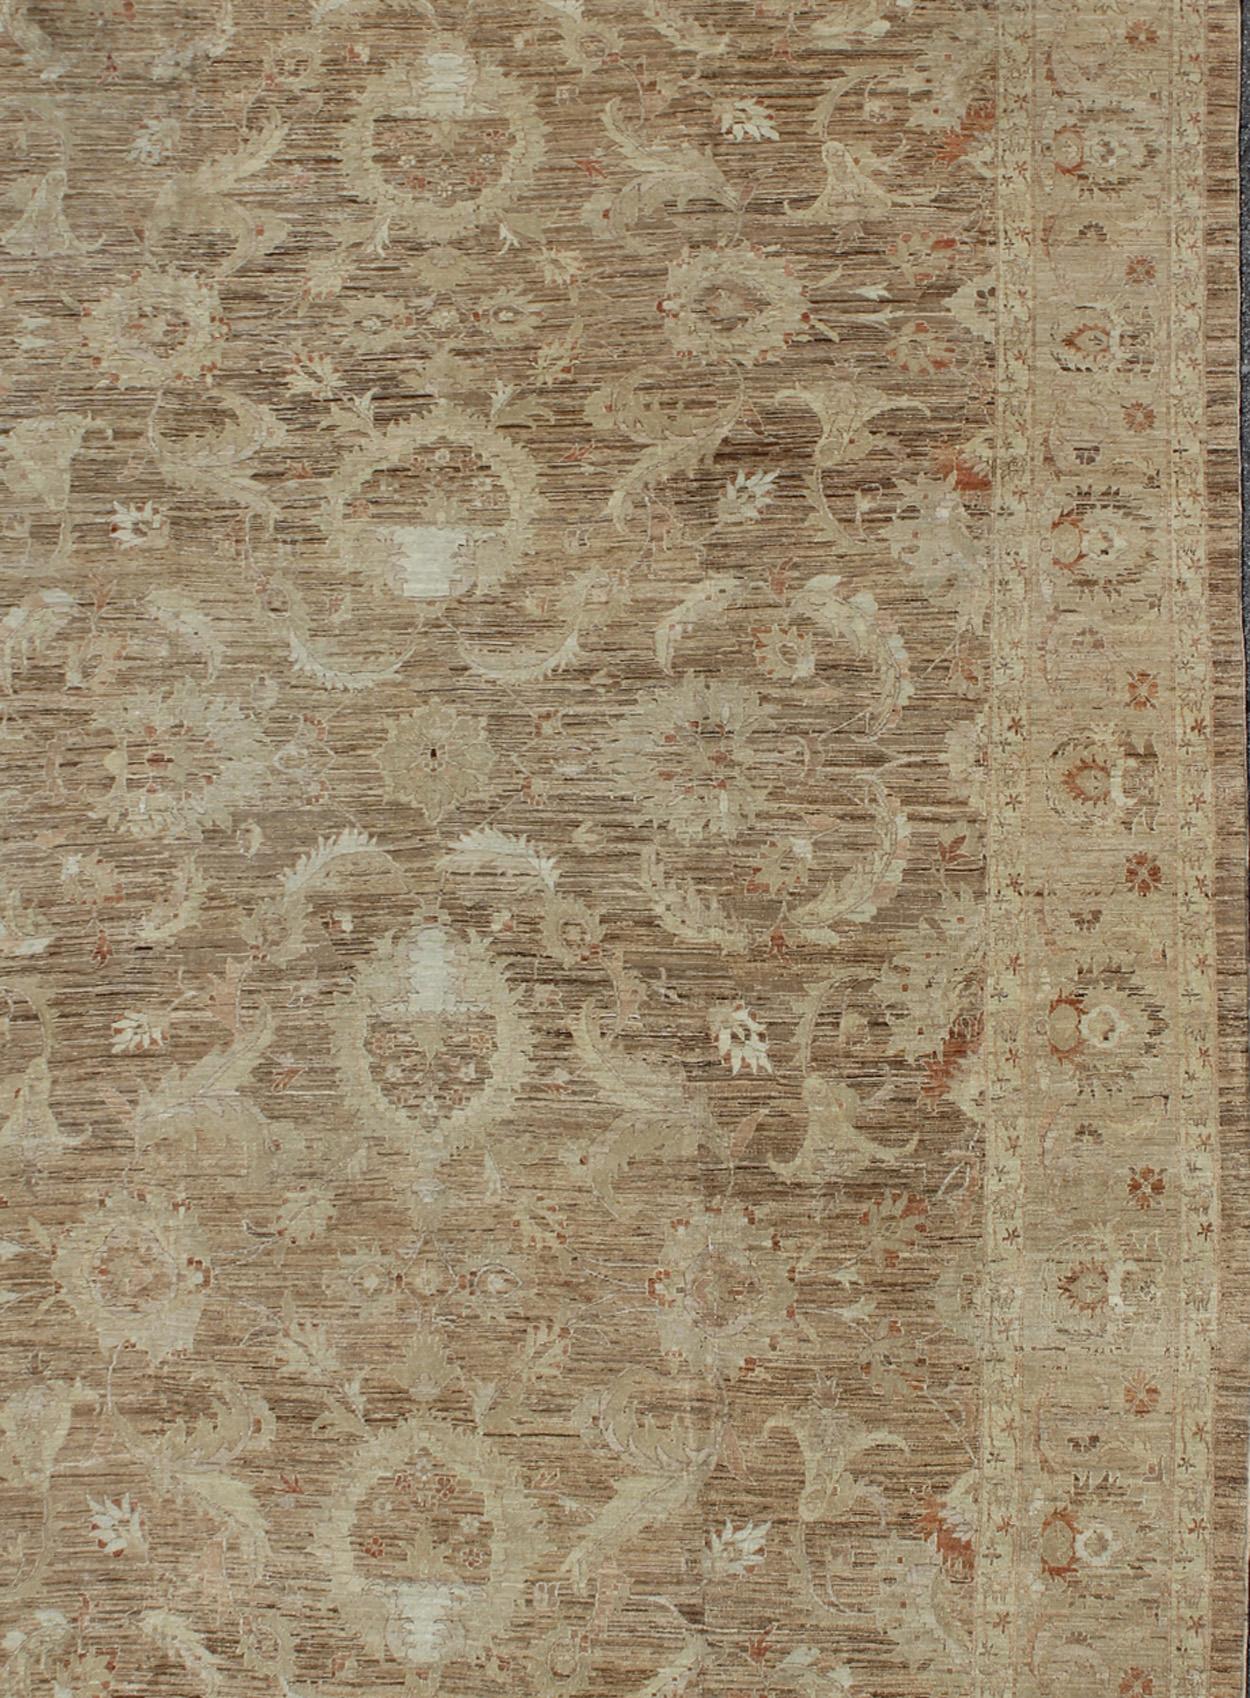 Variegated light brown, light green and earth tone Afghan made Sultanabad design rug with florals. rug, M14-0405 country of origin / type: Afghan / circa 1980.

Measures: 14'0 x 21'0

This elegantly handwoven hand woven rug is from Afghanistan